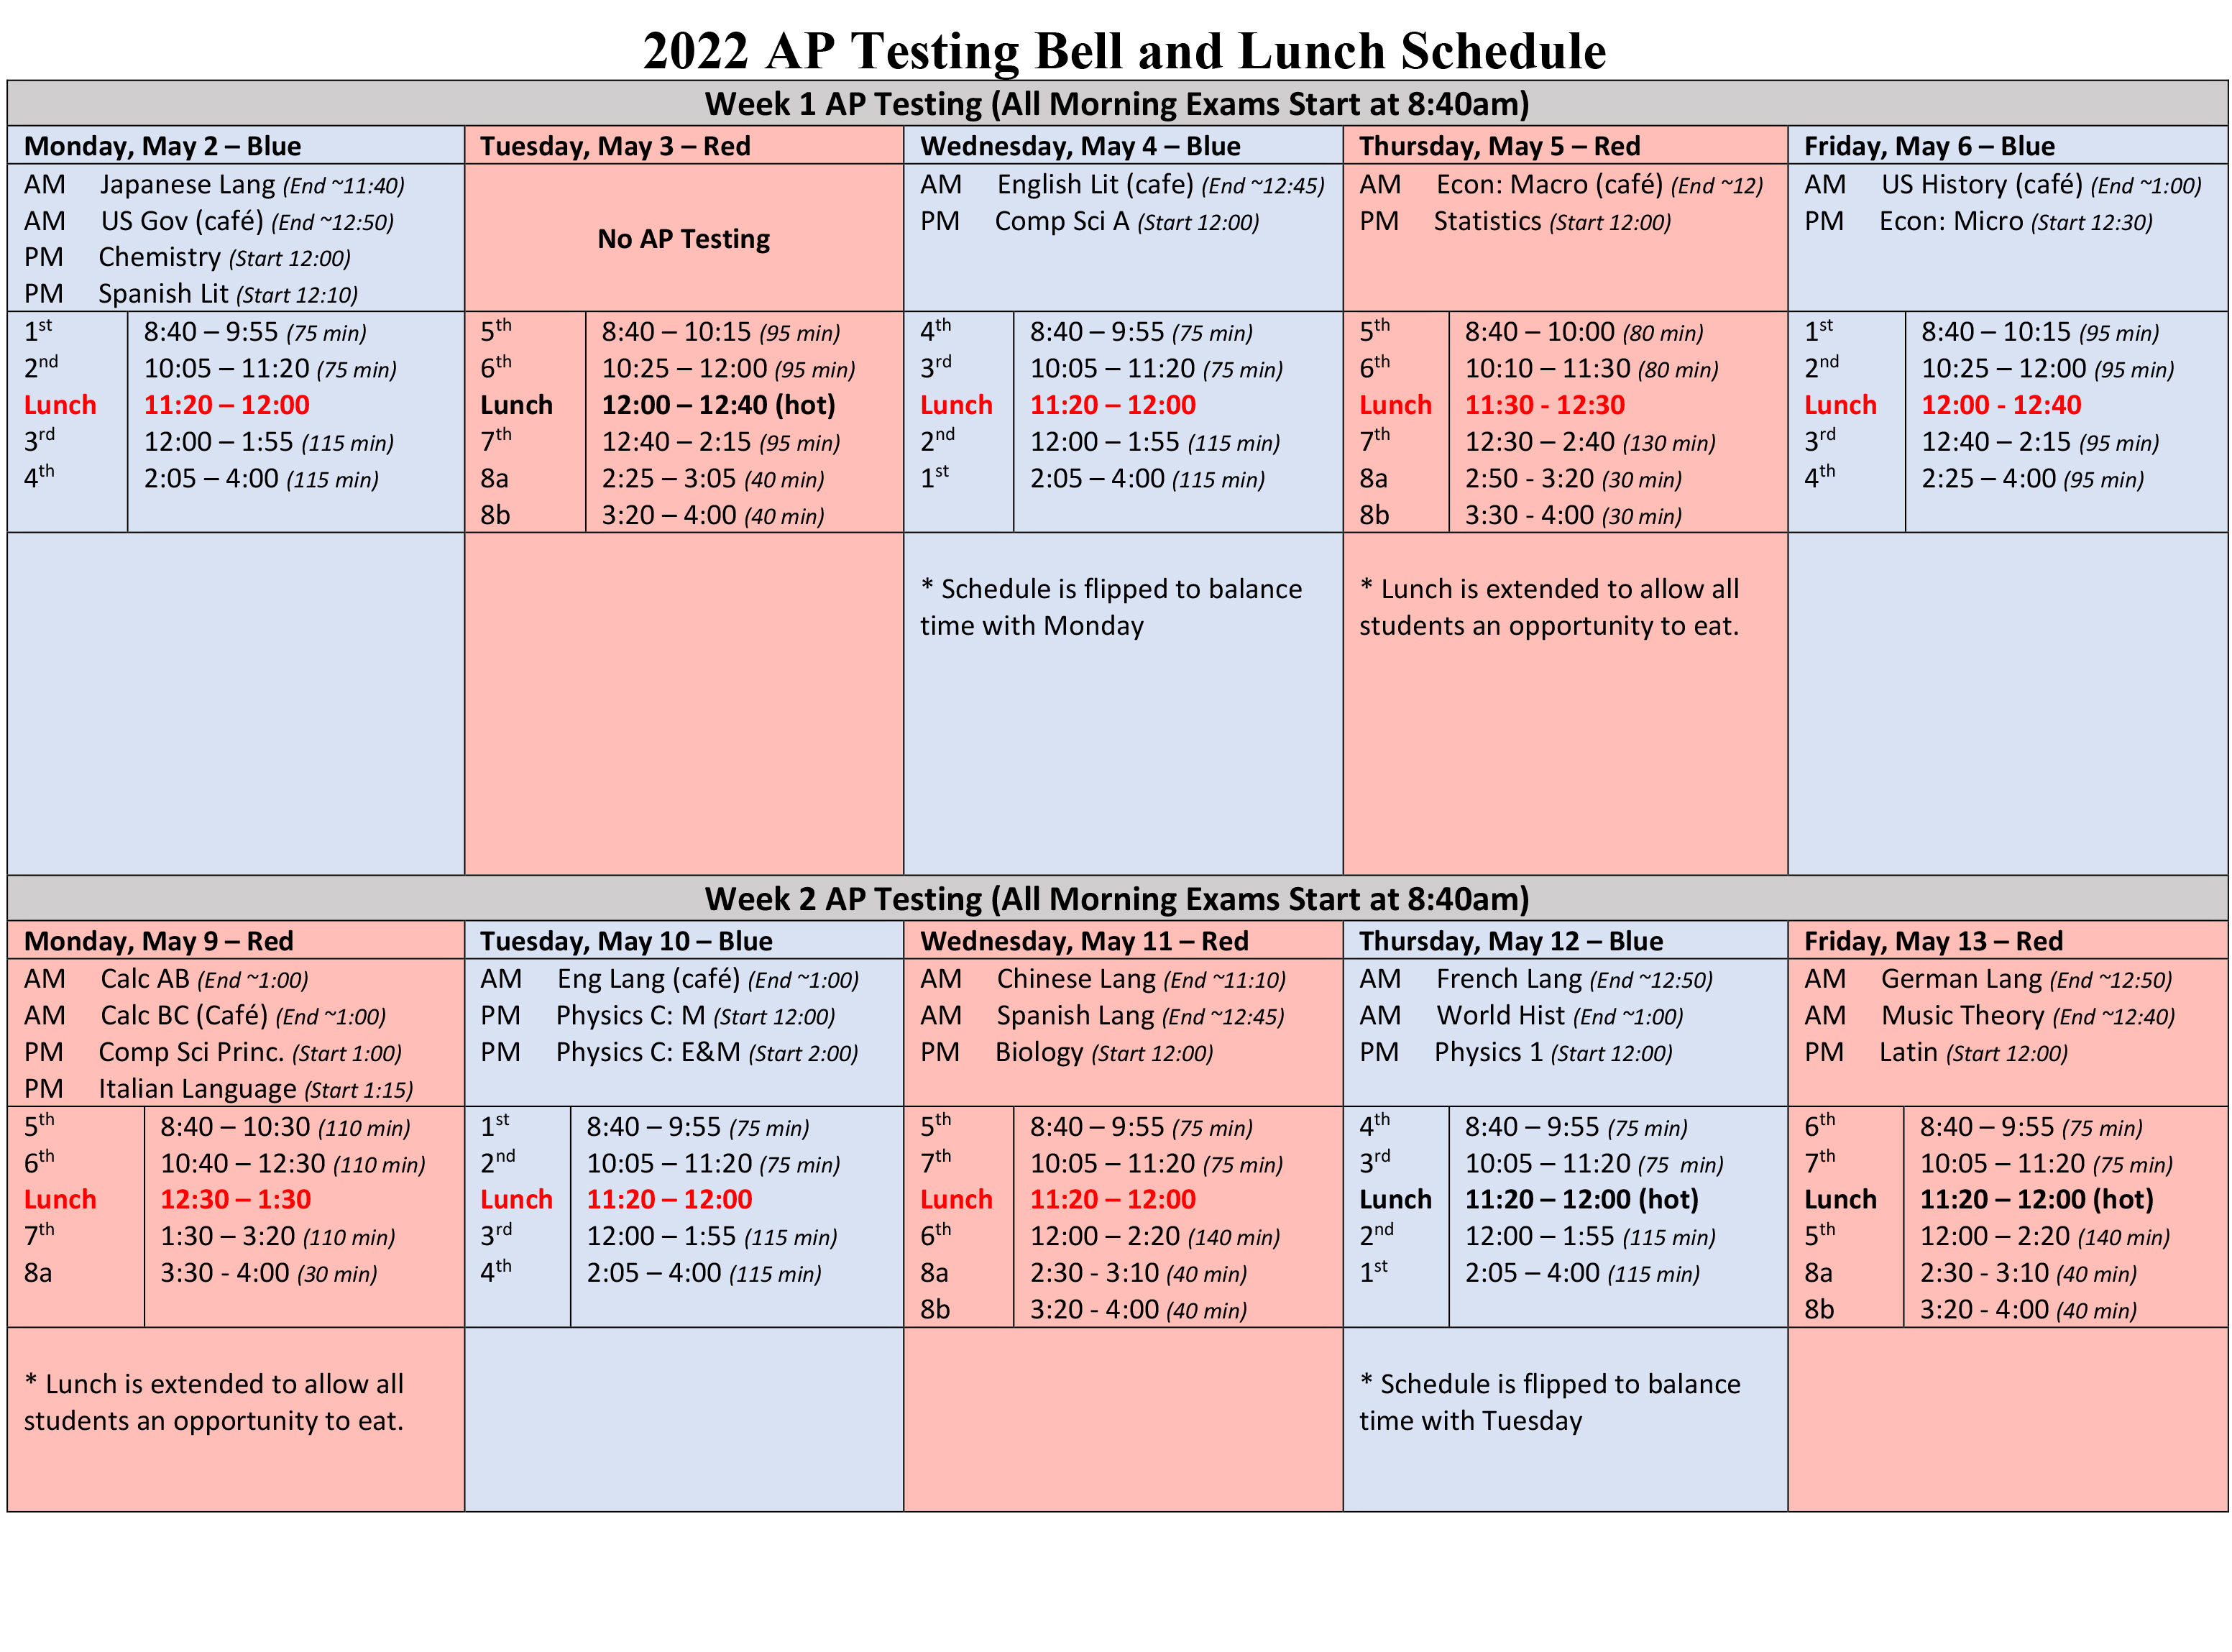 AP Testing and Lunch Schedule for Makeup Week